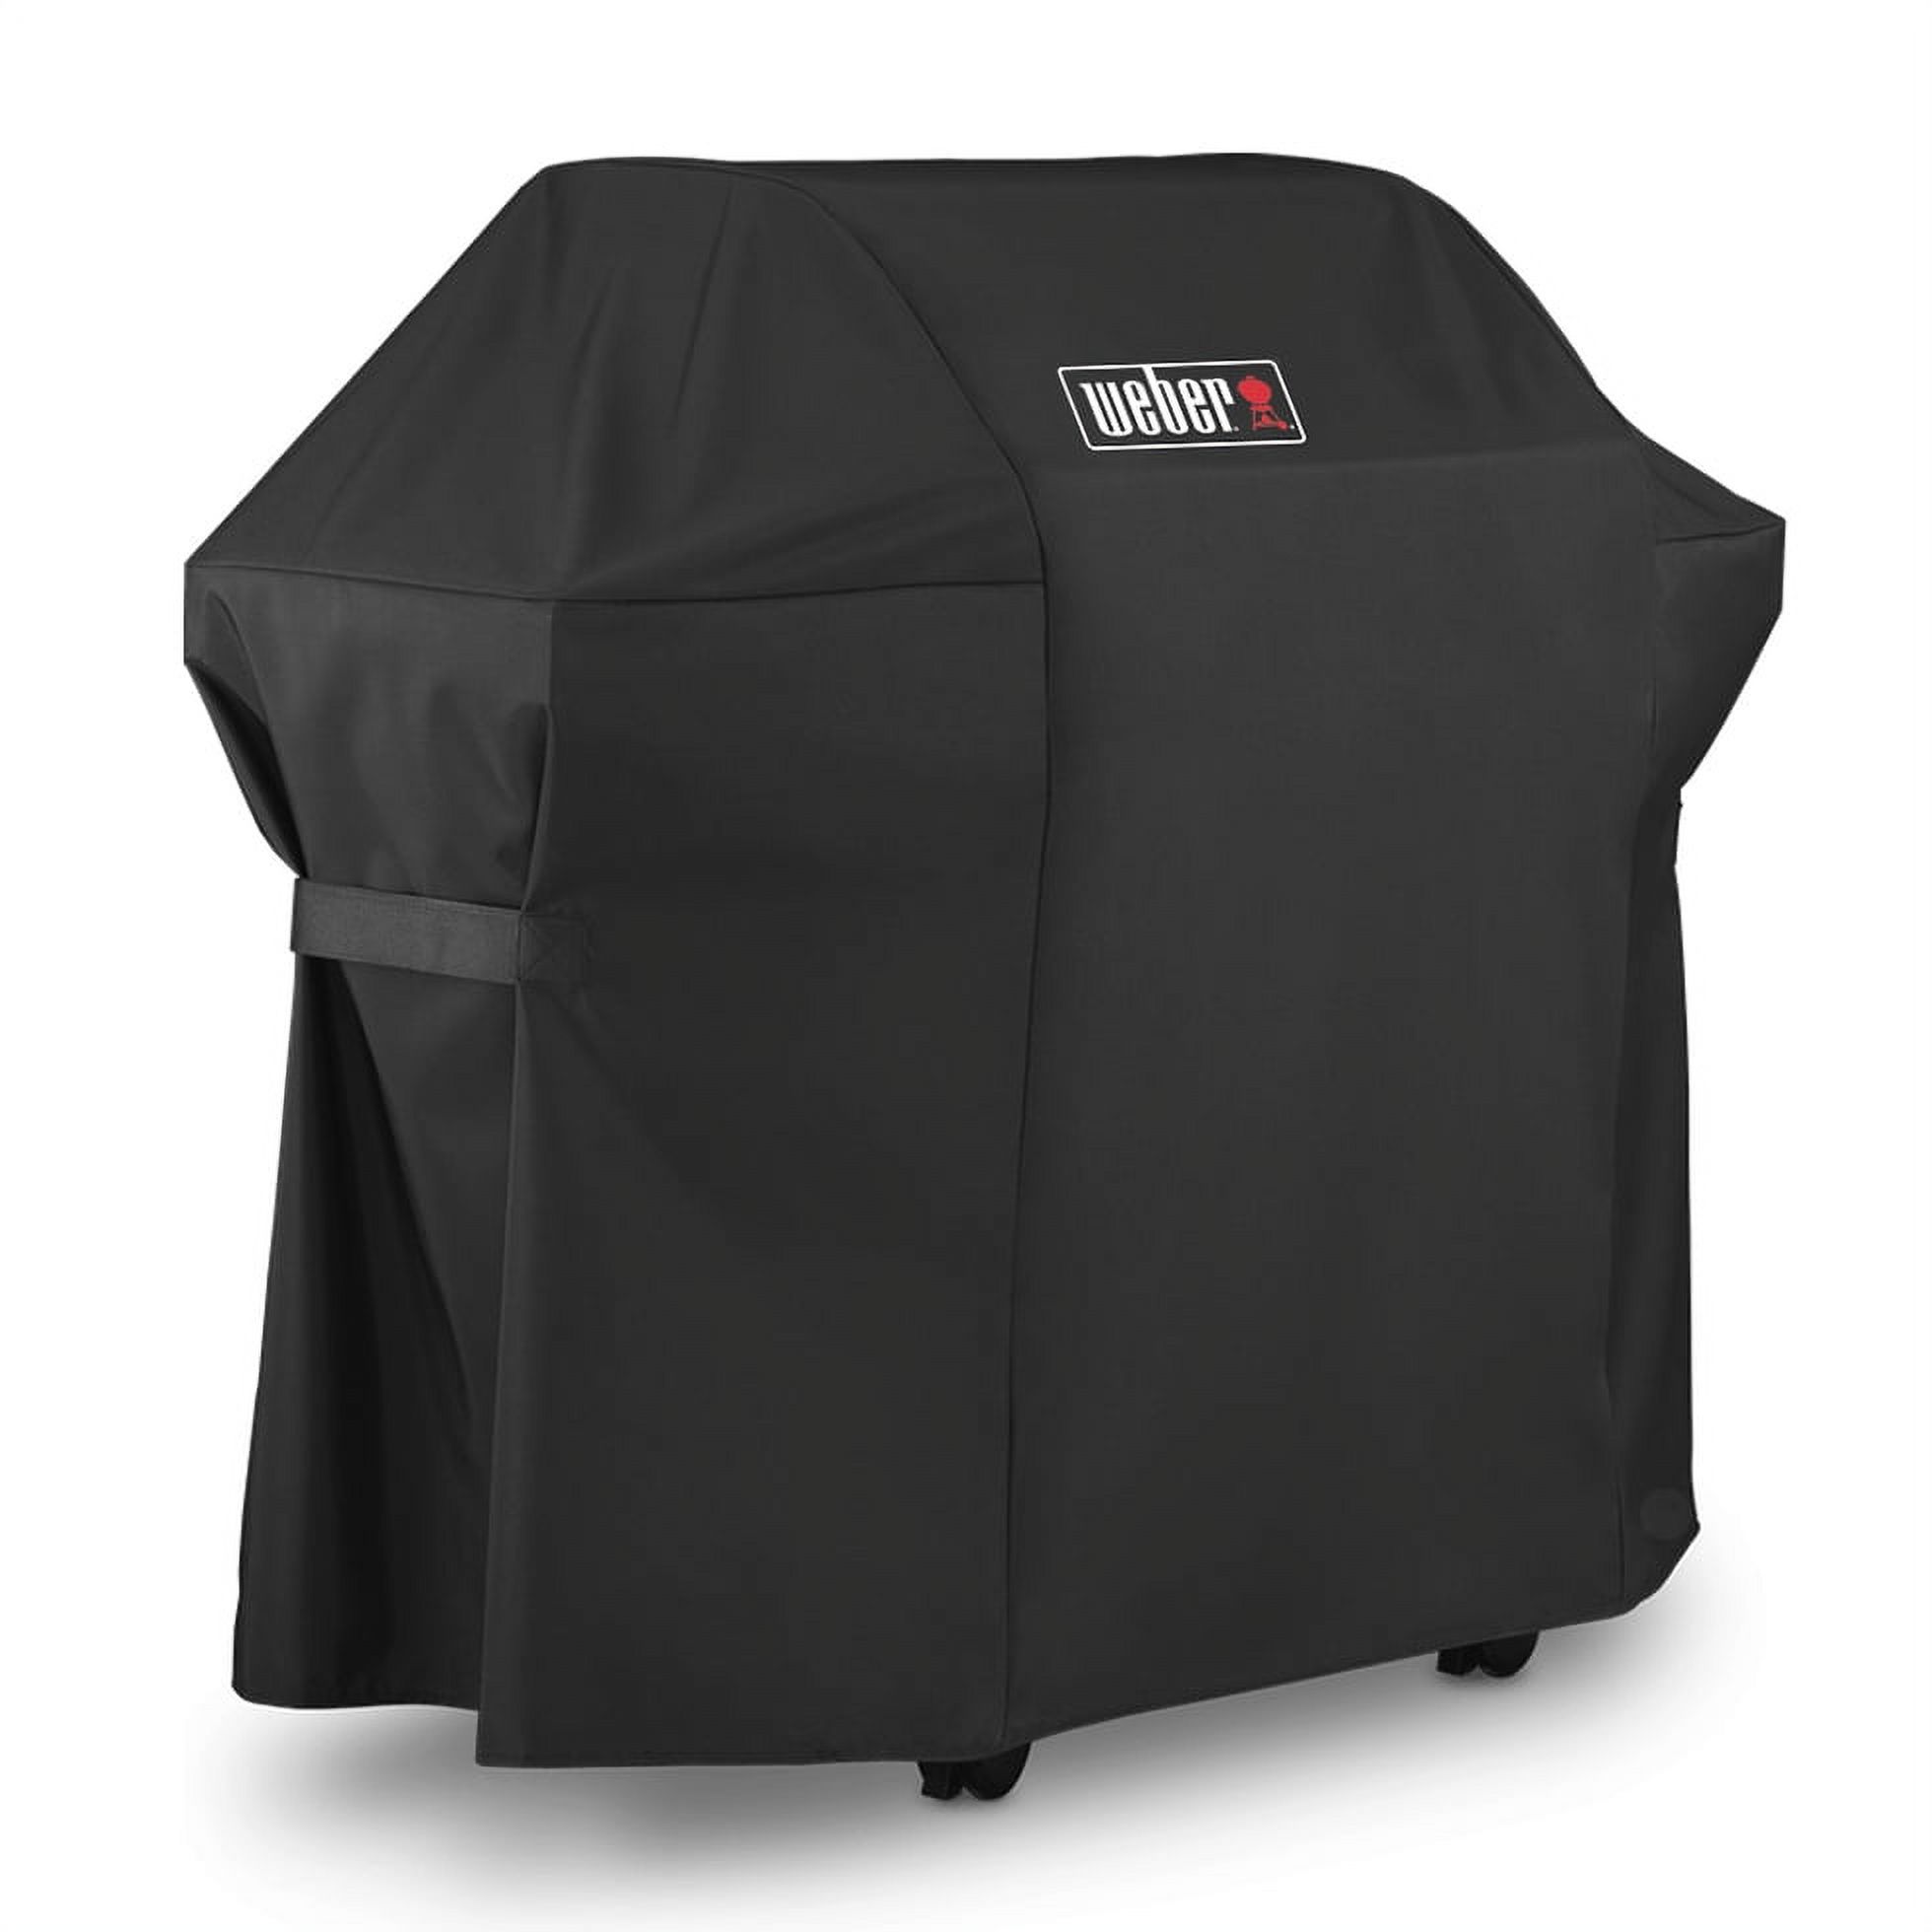 Weber 7107 Grill Cover for Weber Genesis 300 Series and Genesis II Gas Grills (60 X 24 X 44 inches) - image 5 of 5